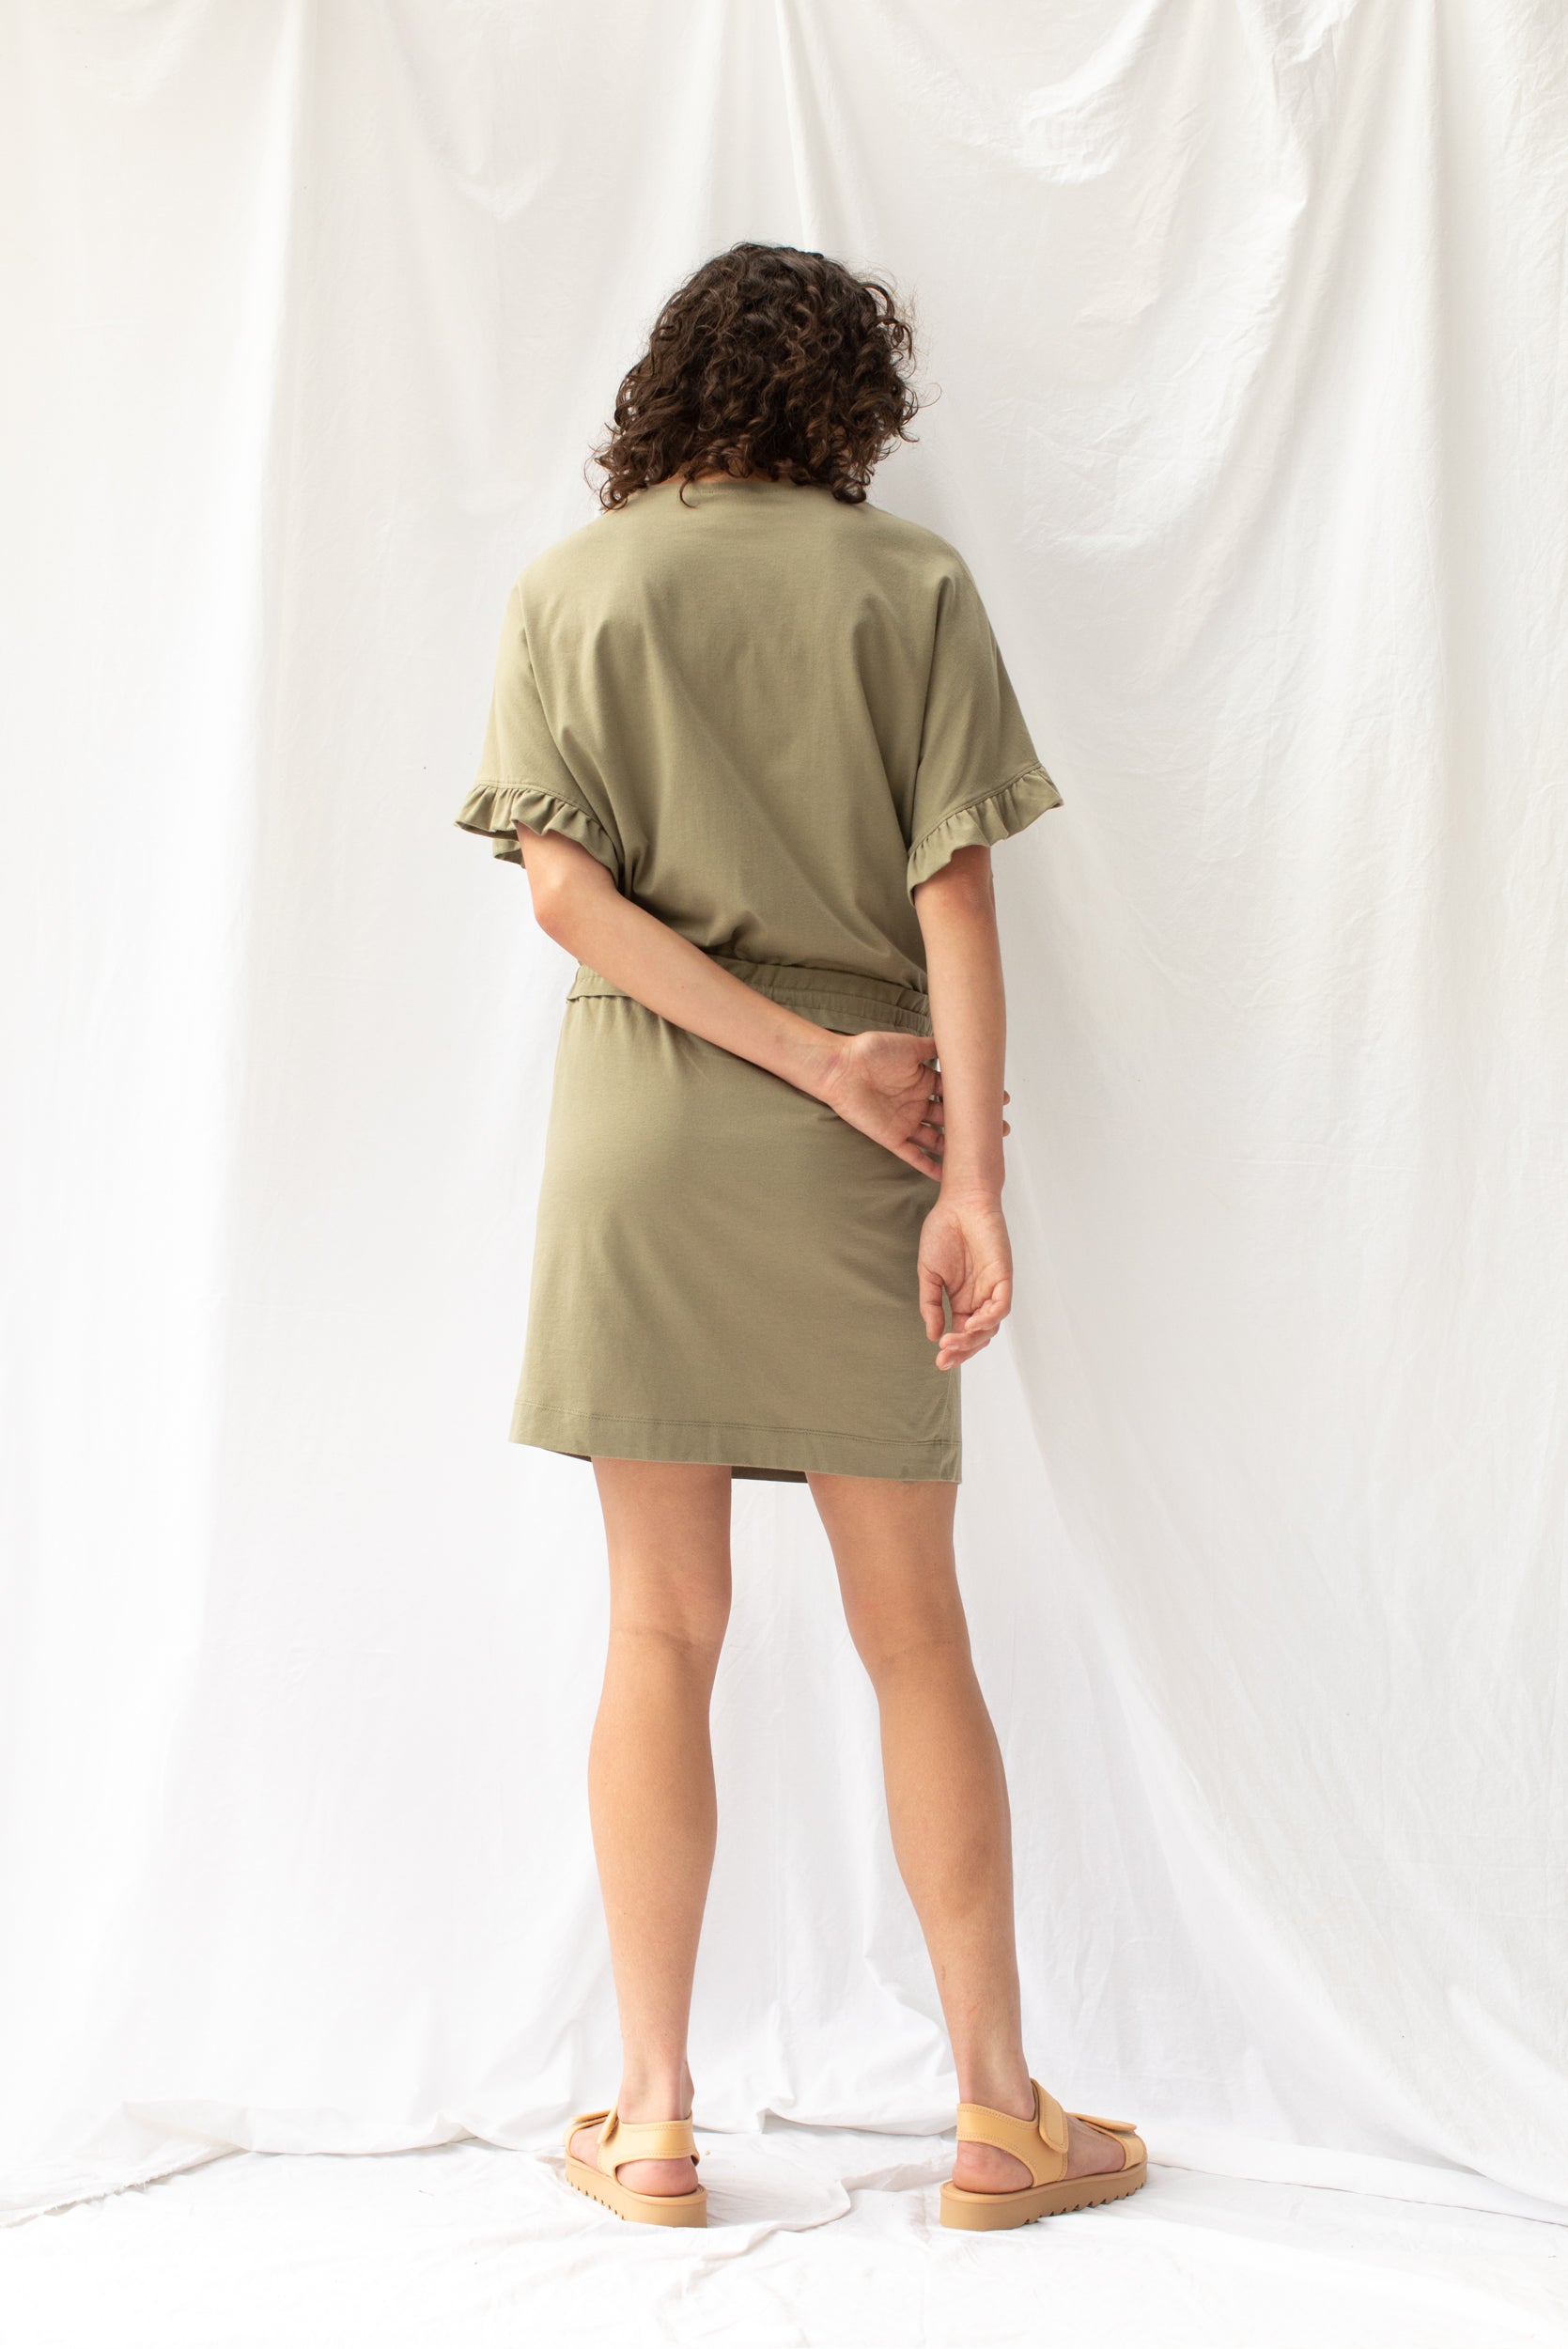 Composure Dress | Olive (XL only)